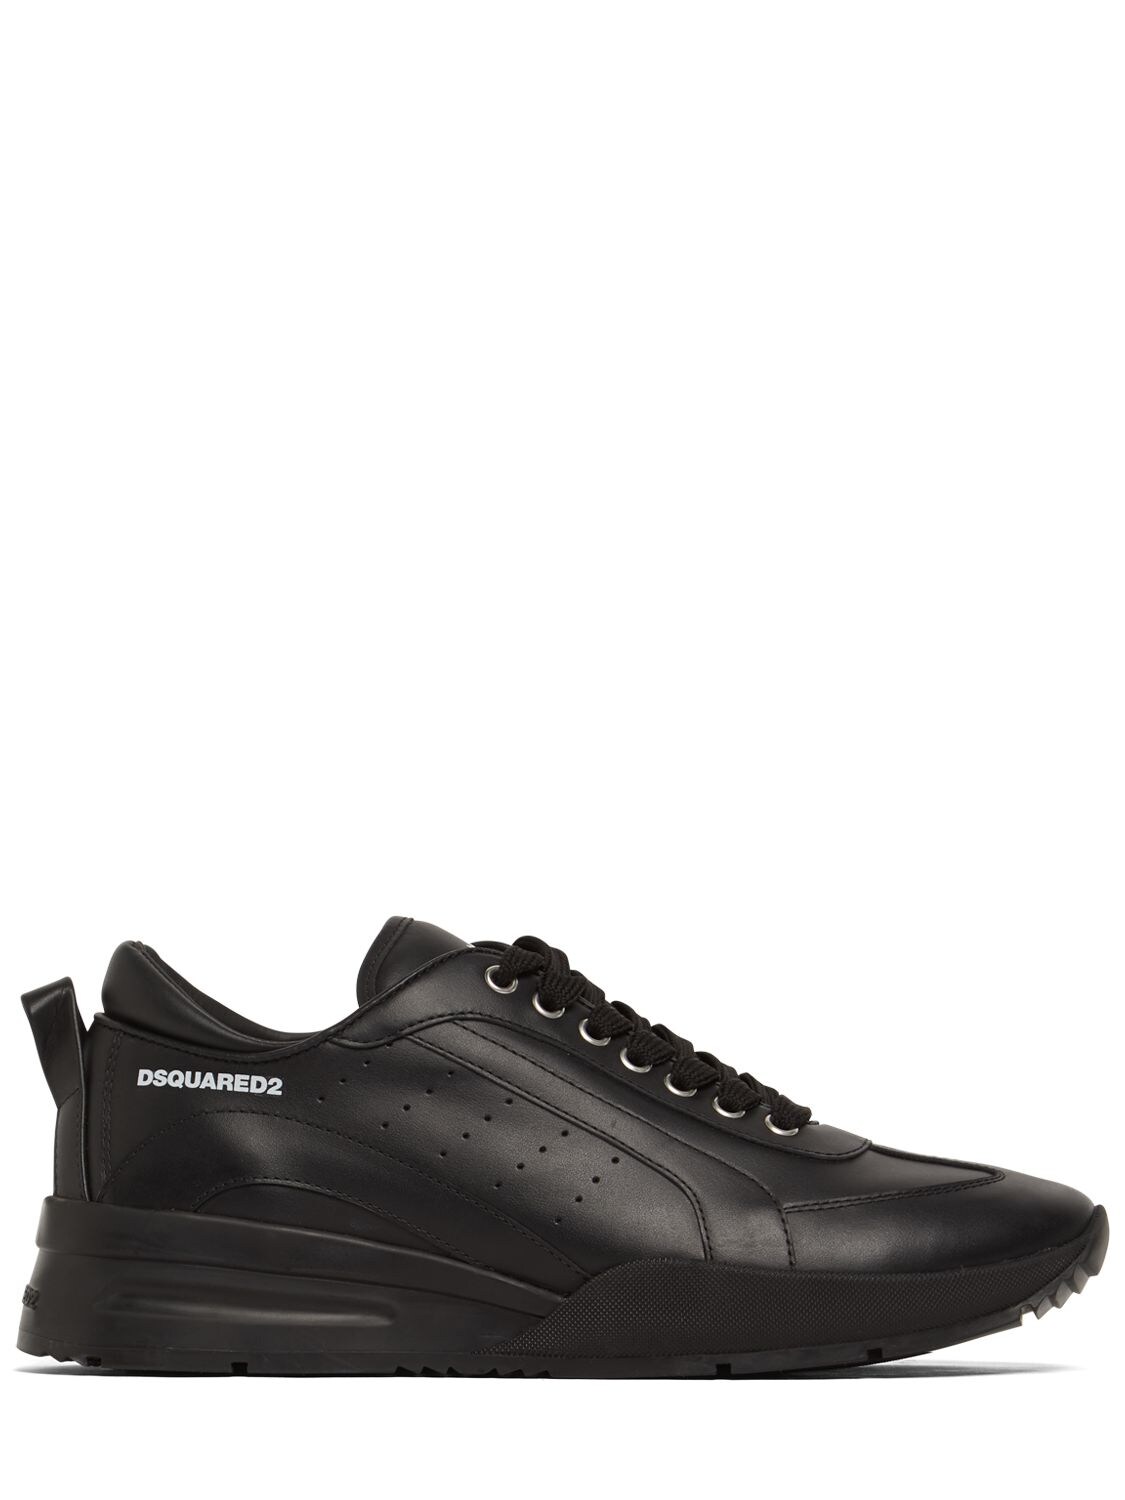 DSQUARED2 LEGEND 551 LEATHER LOW TOP SNEAKERS